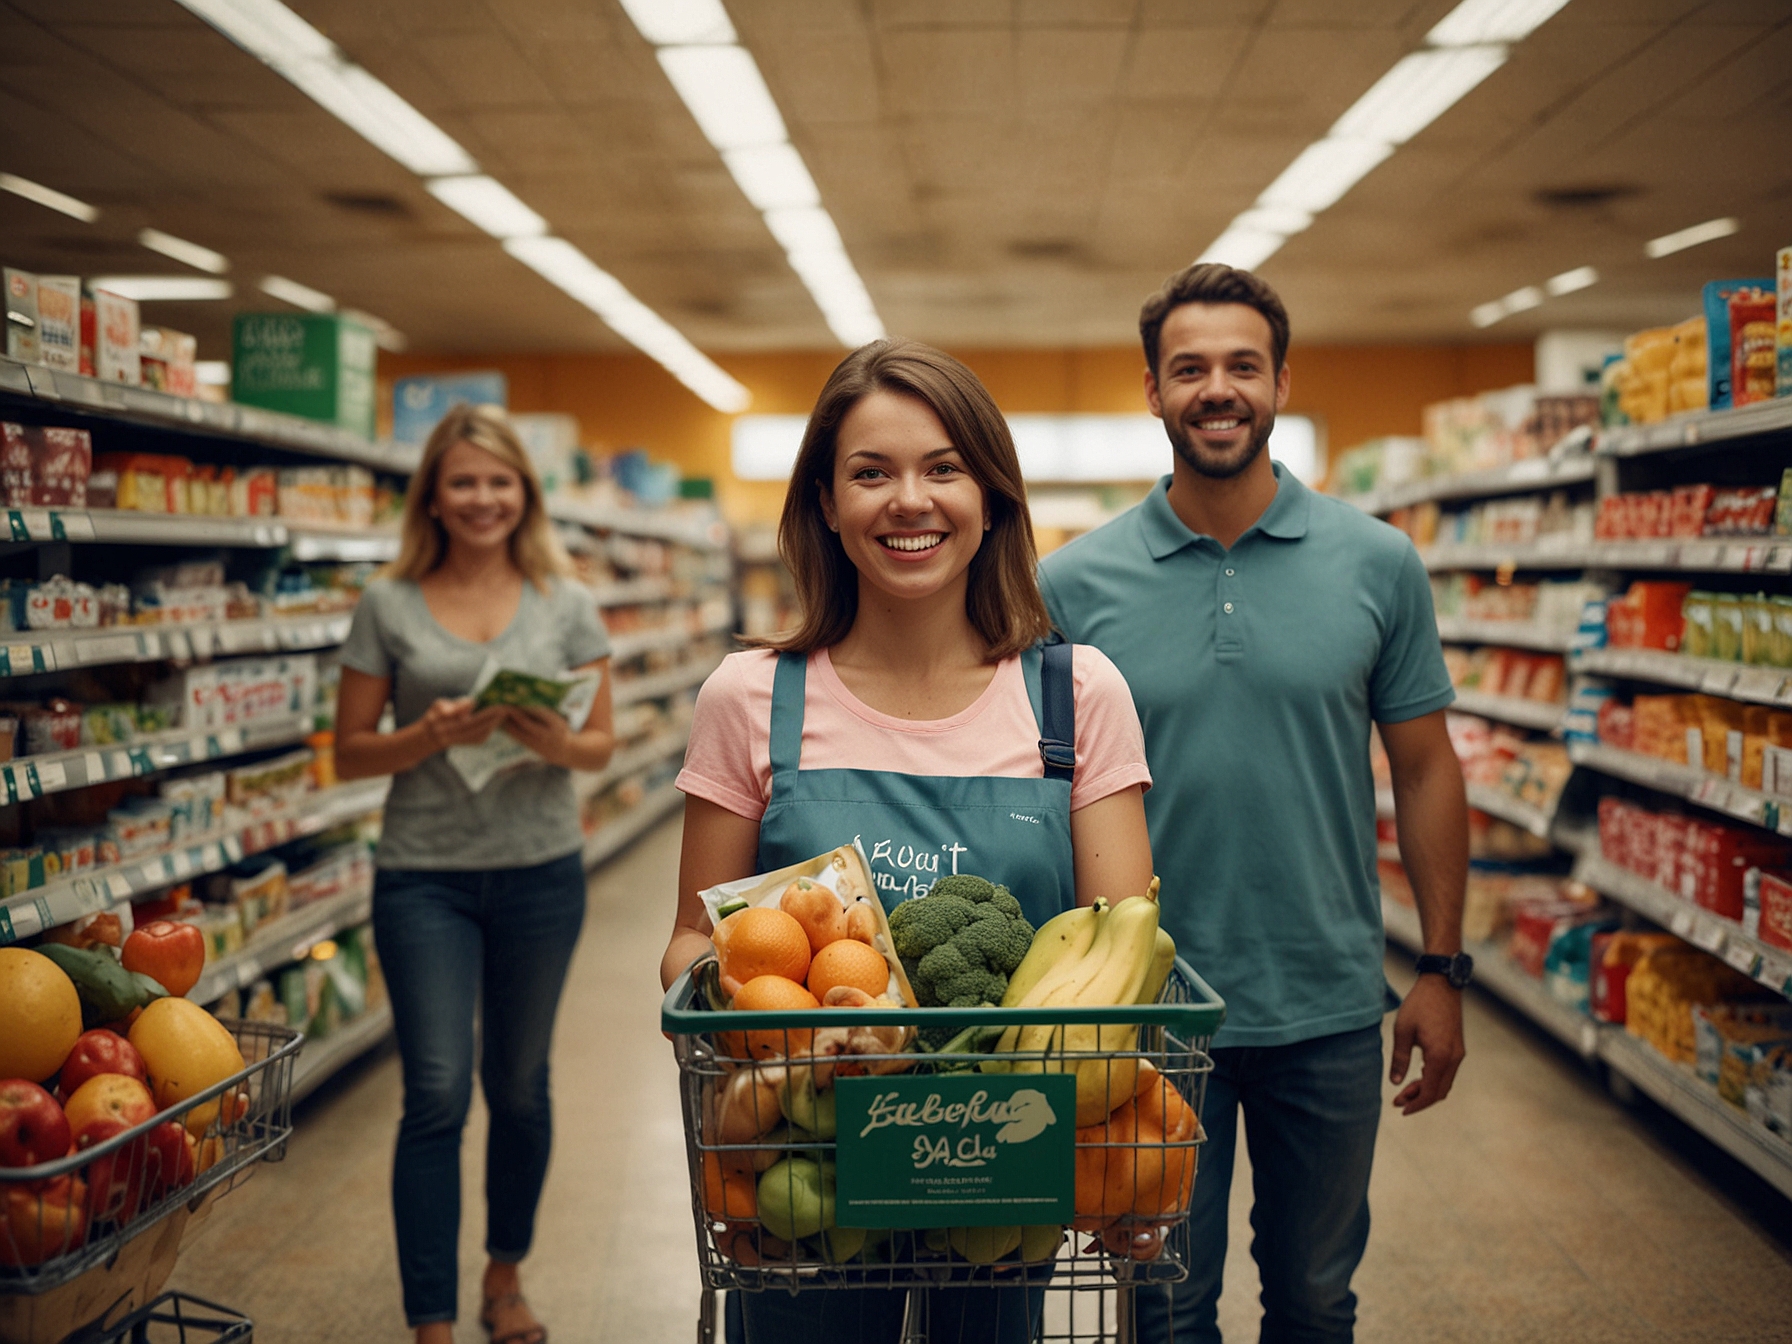 An image of a happy family in a supermarket, holding free school meal vouchers worth up to £120, showcasing how the initiative provides relief to parents by ensuring access to nutritious food during summer.